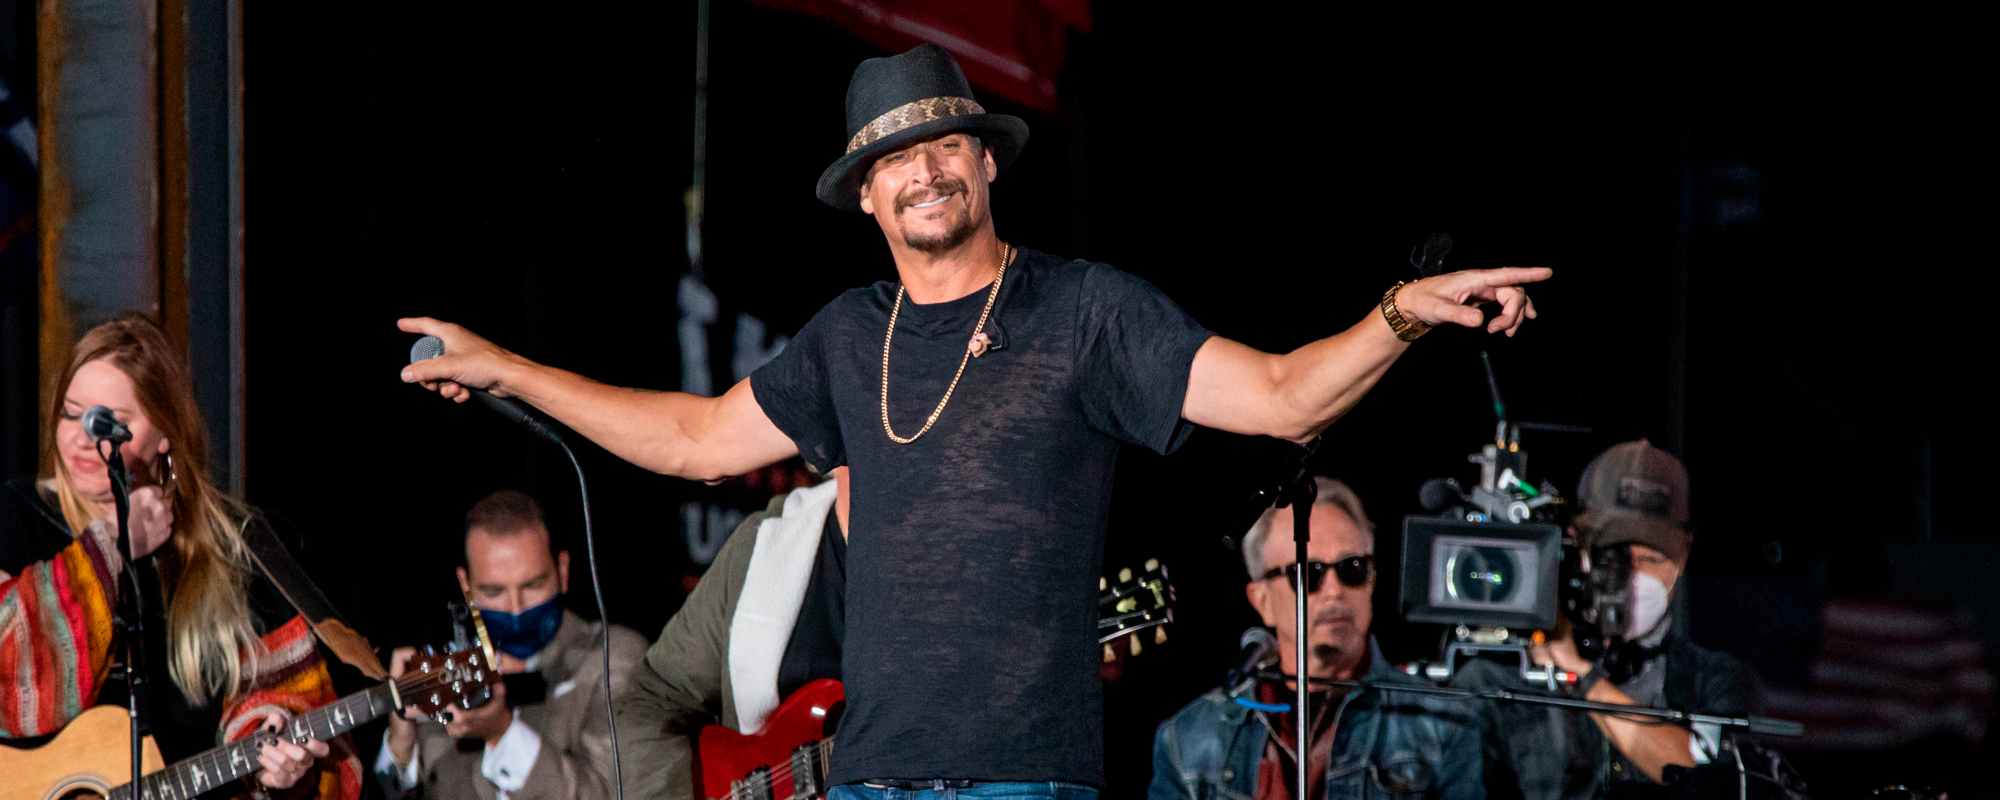 Kid Rock Announces 4-Date No Snowflakes Tour with Travis Tritt and More